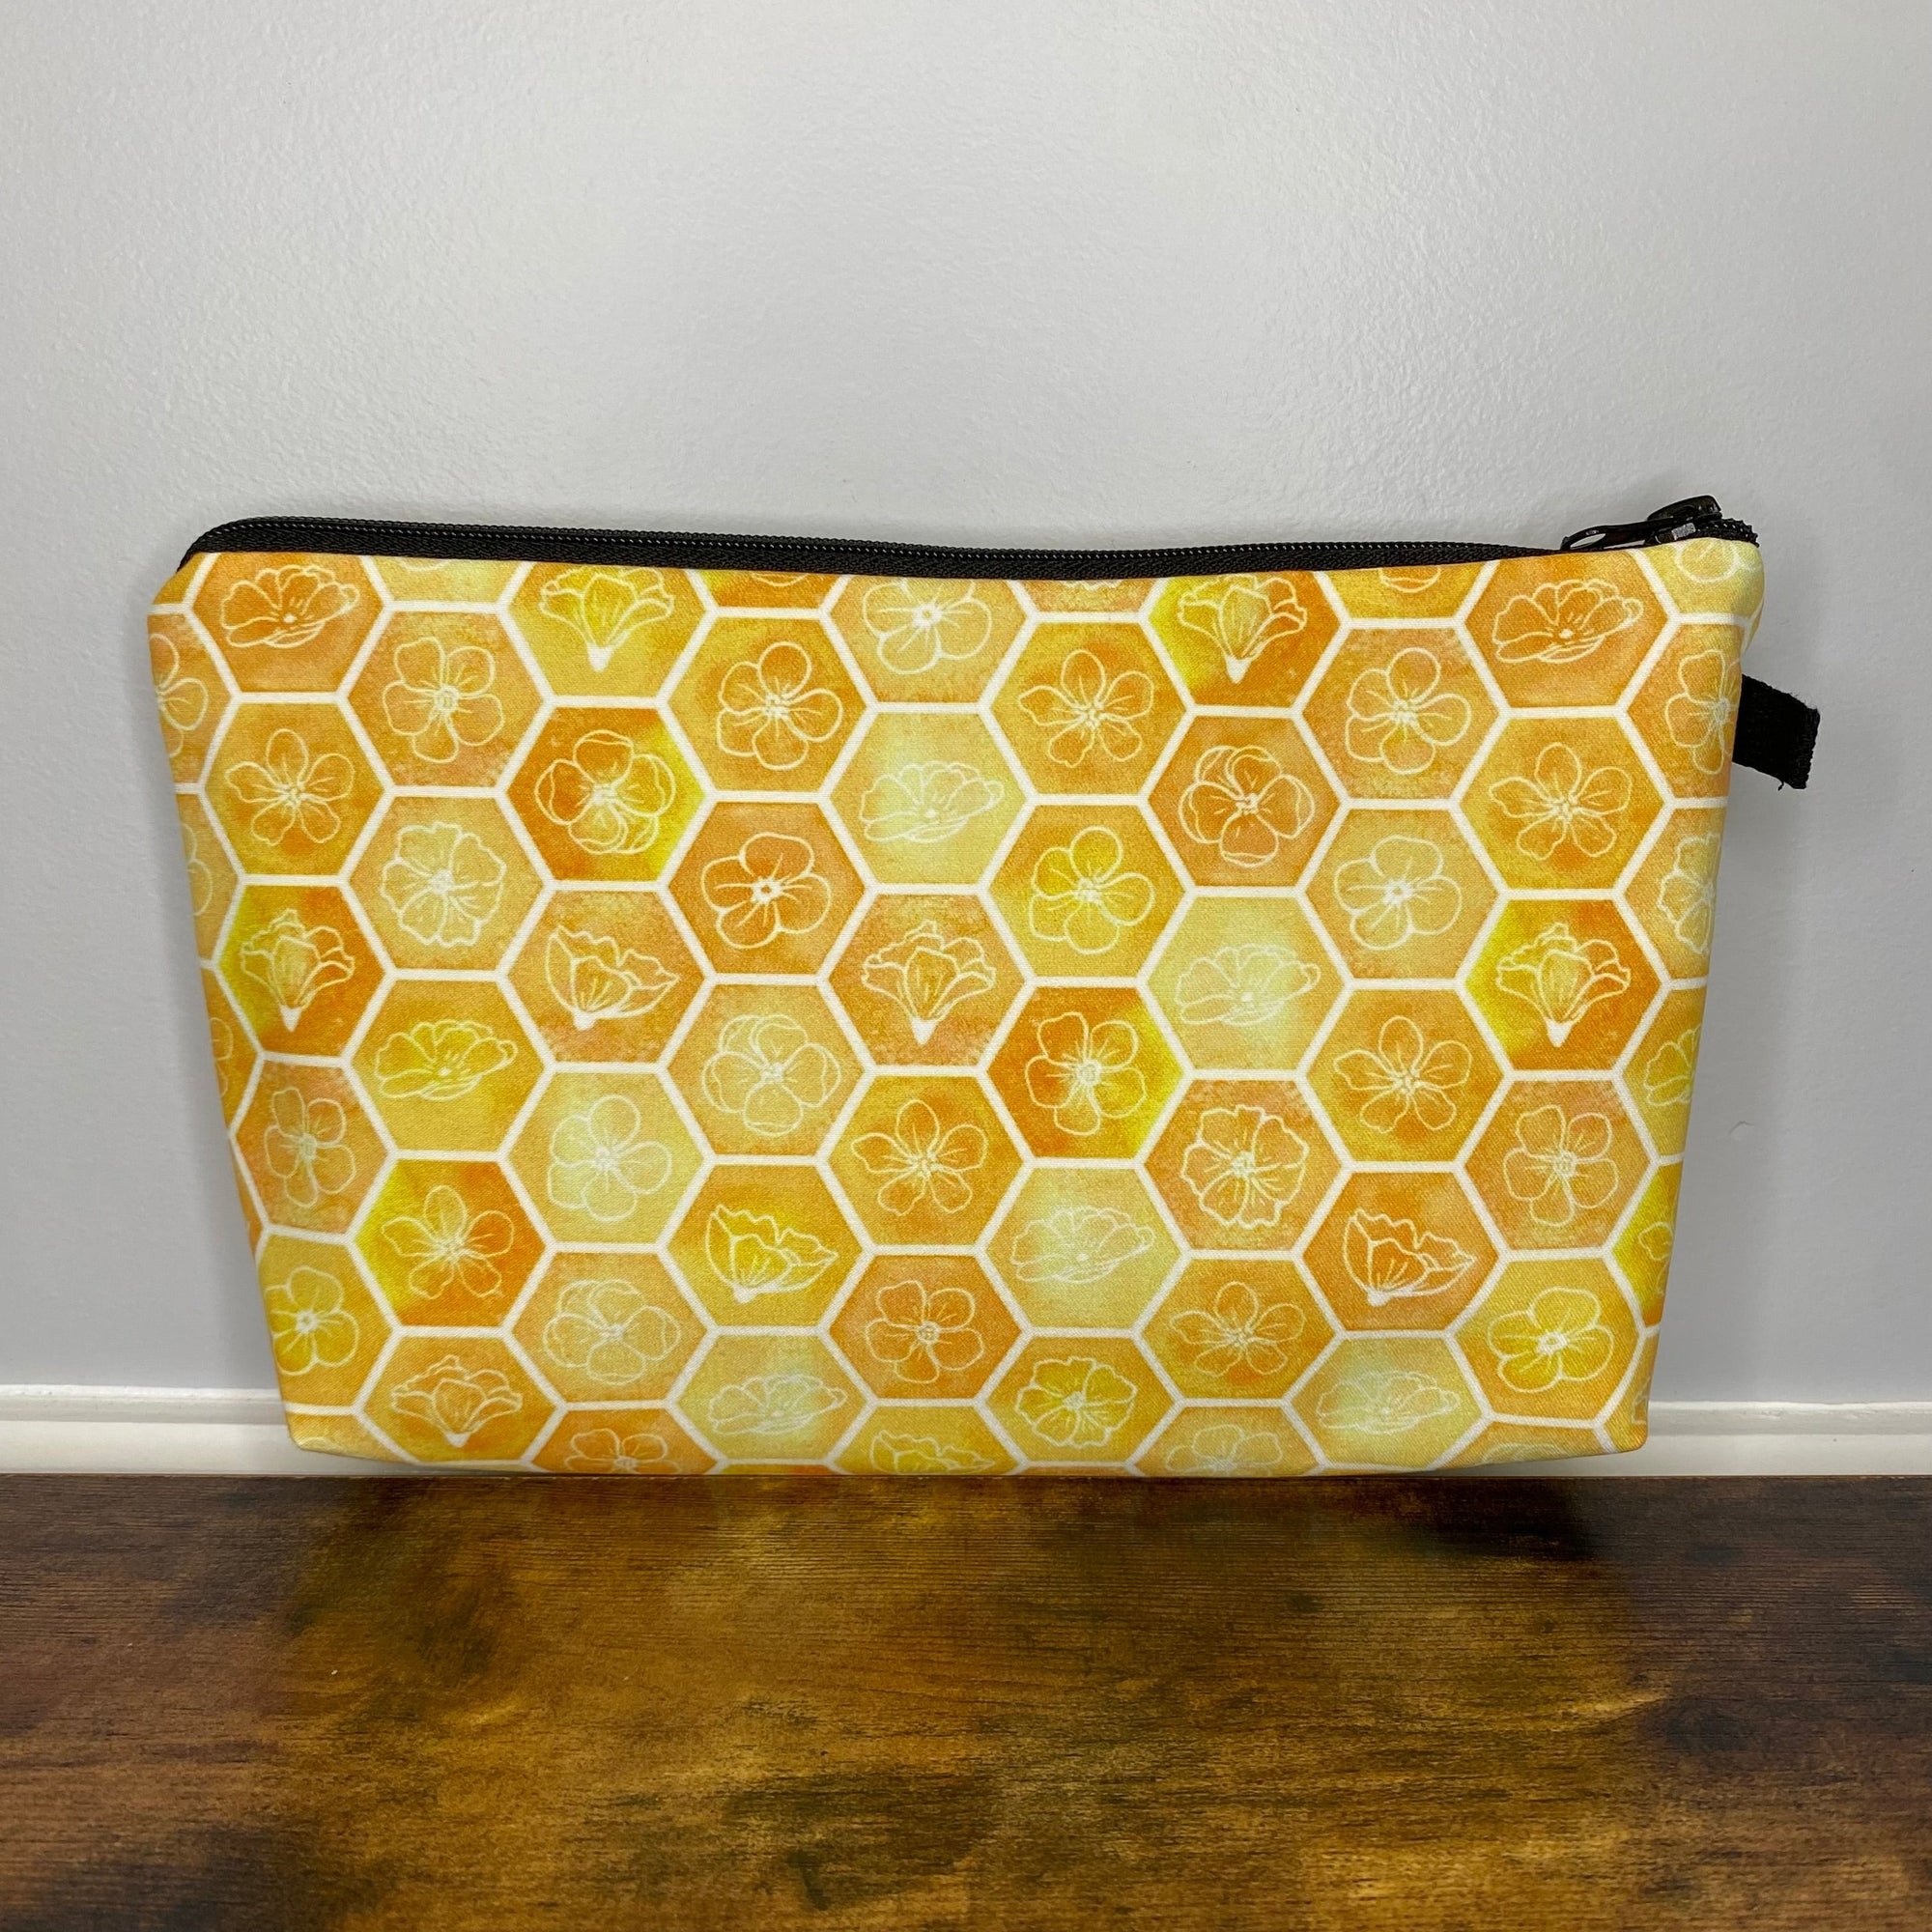 Pouch - Bee, Honeycomb Designs